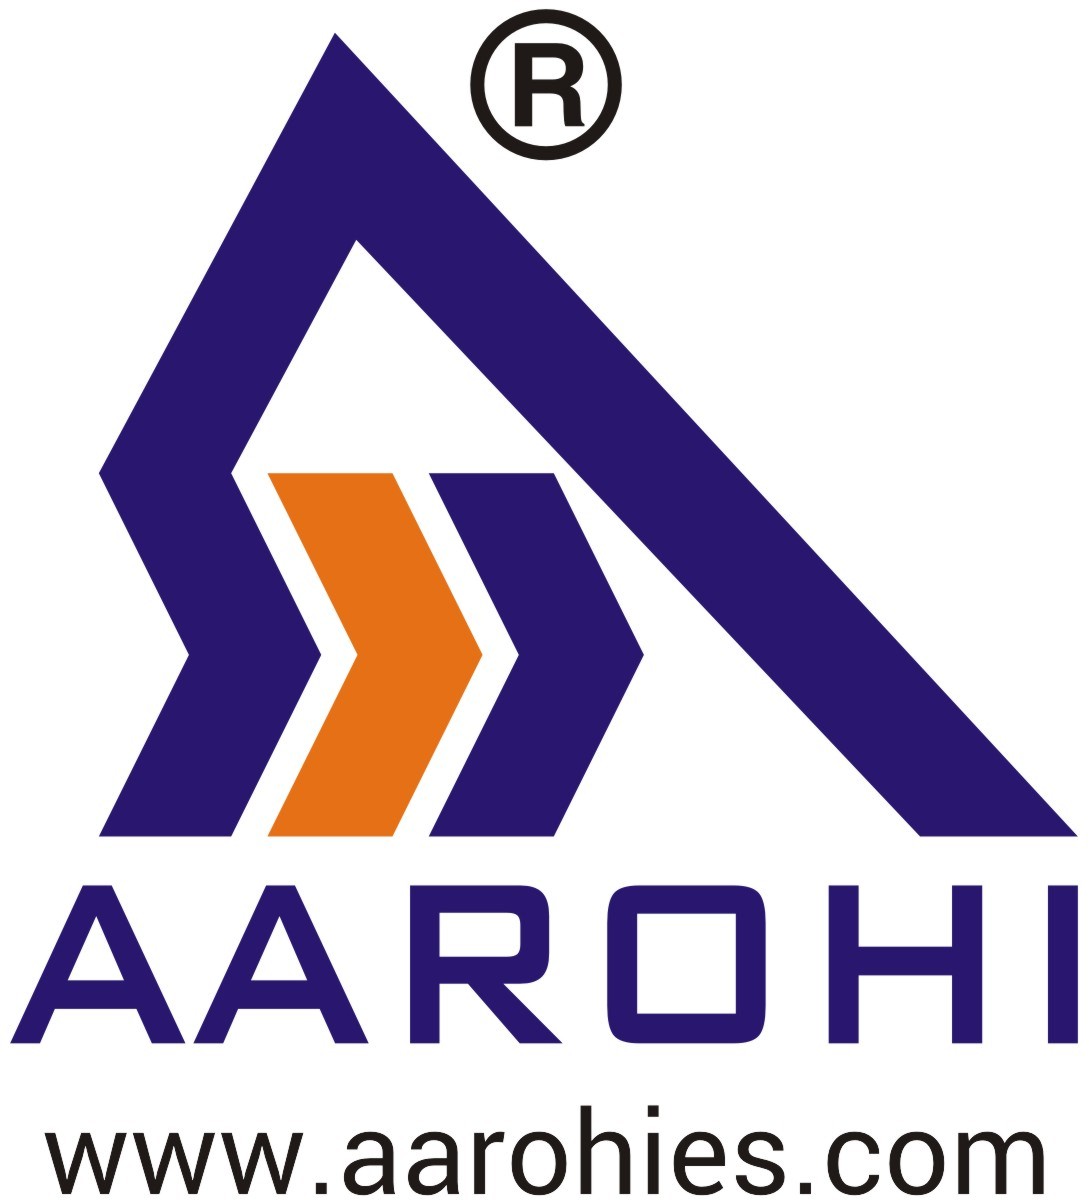 AAROHI EMBEDDED SYSTEM